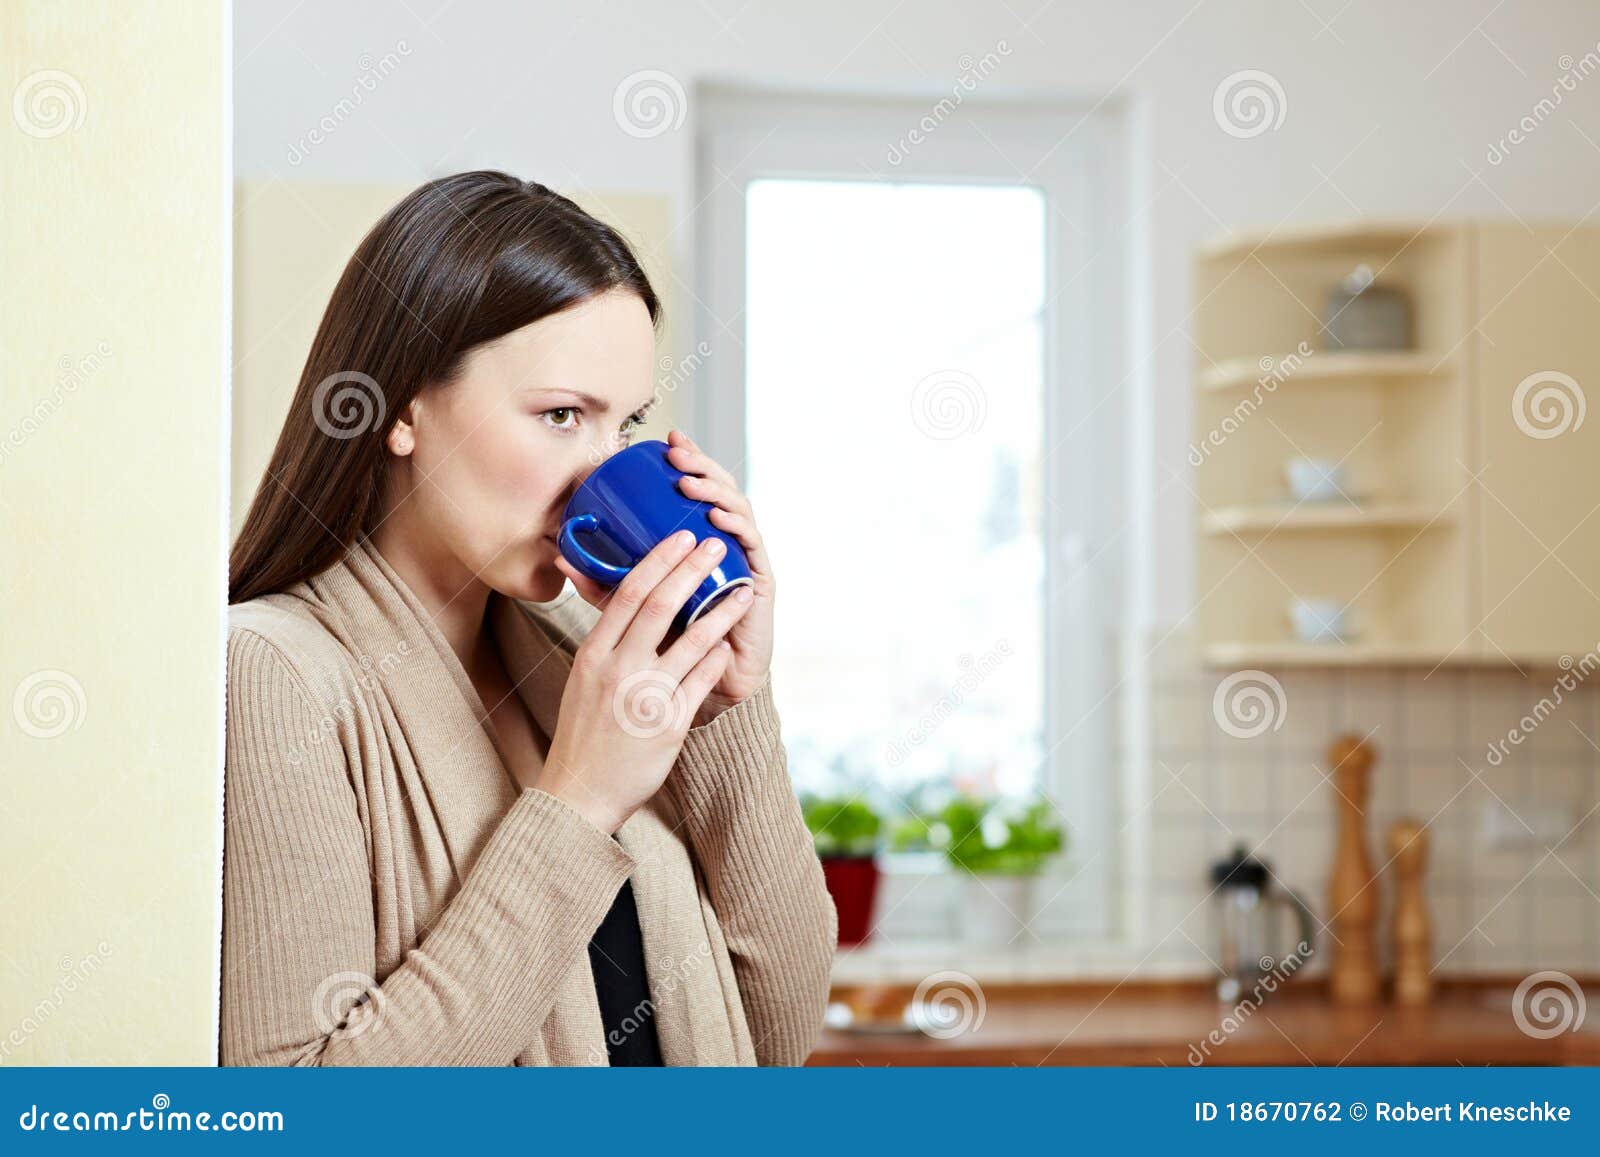 Woman Drinking Cup of Coffee Stock Photo - Image of people, face: 18670762